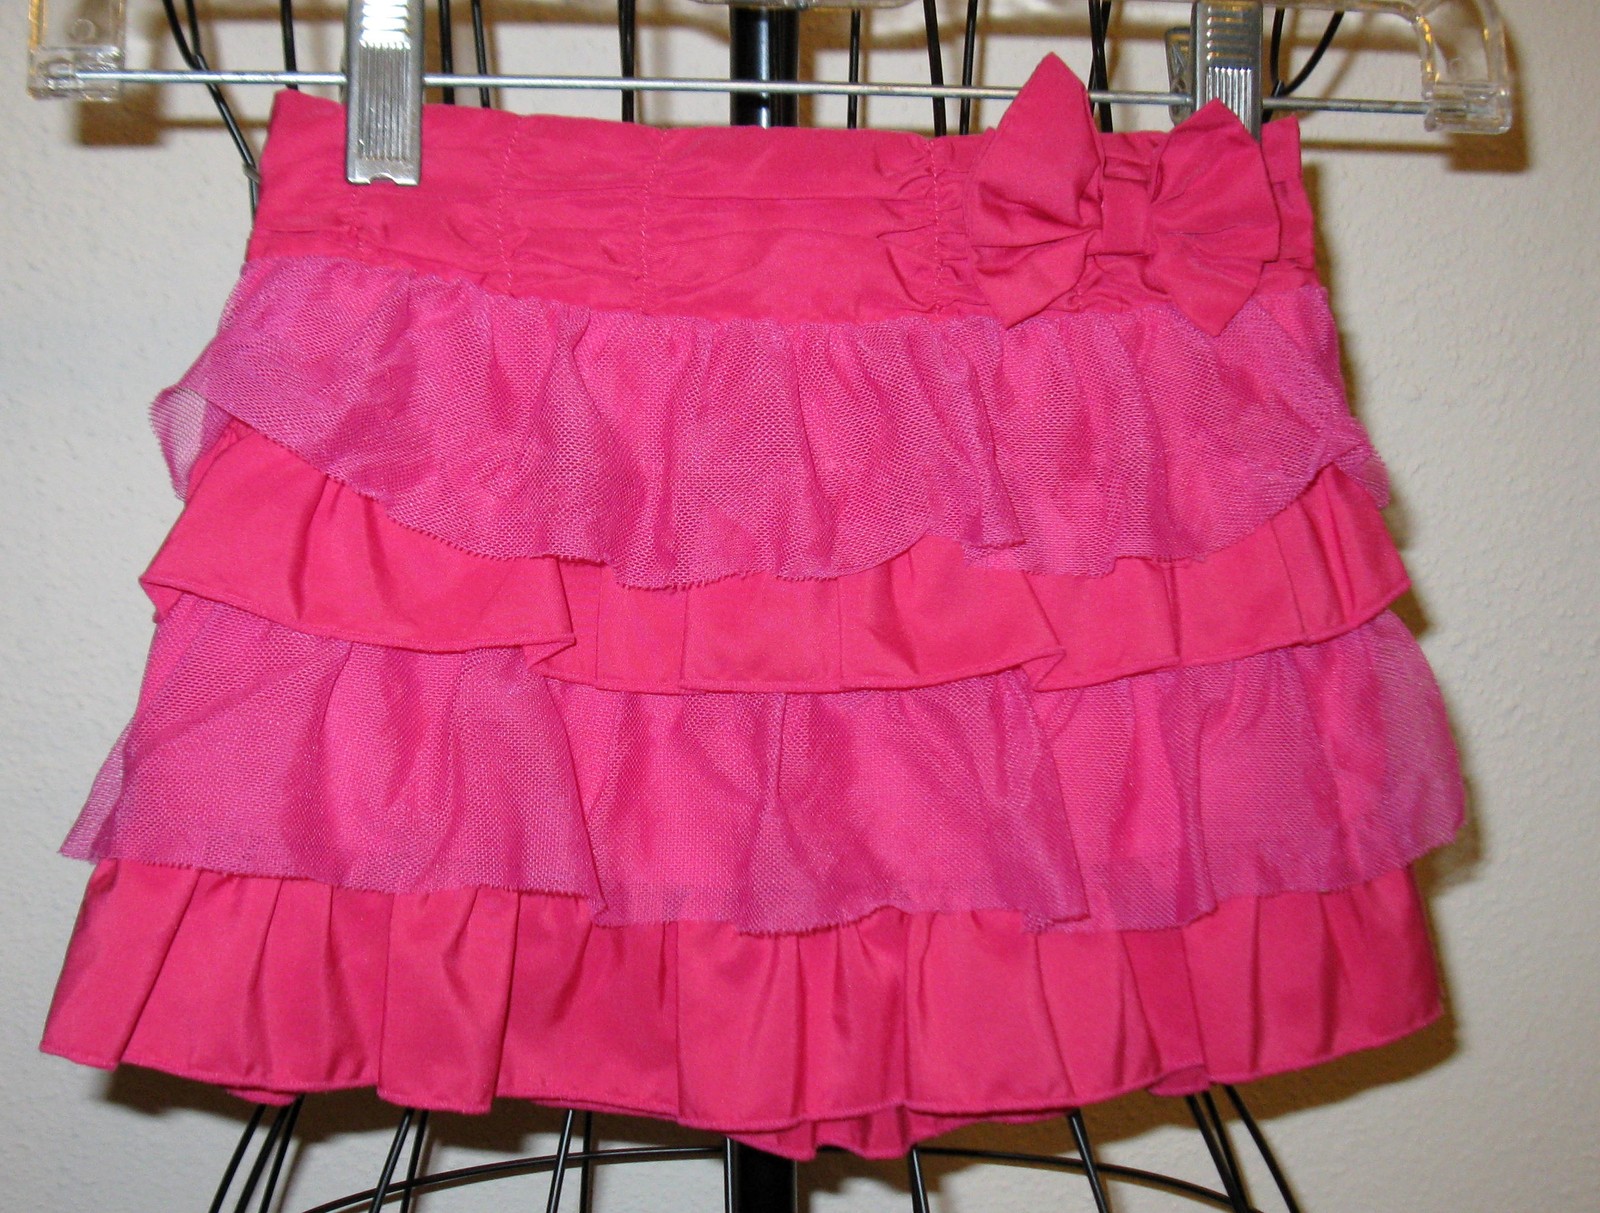 Cute Hot Pink Ruffle Skirt by Healthtex Child Size 3T Nice! #X184 - Skirts